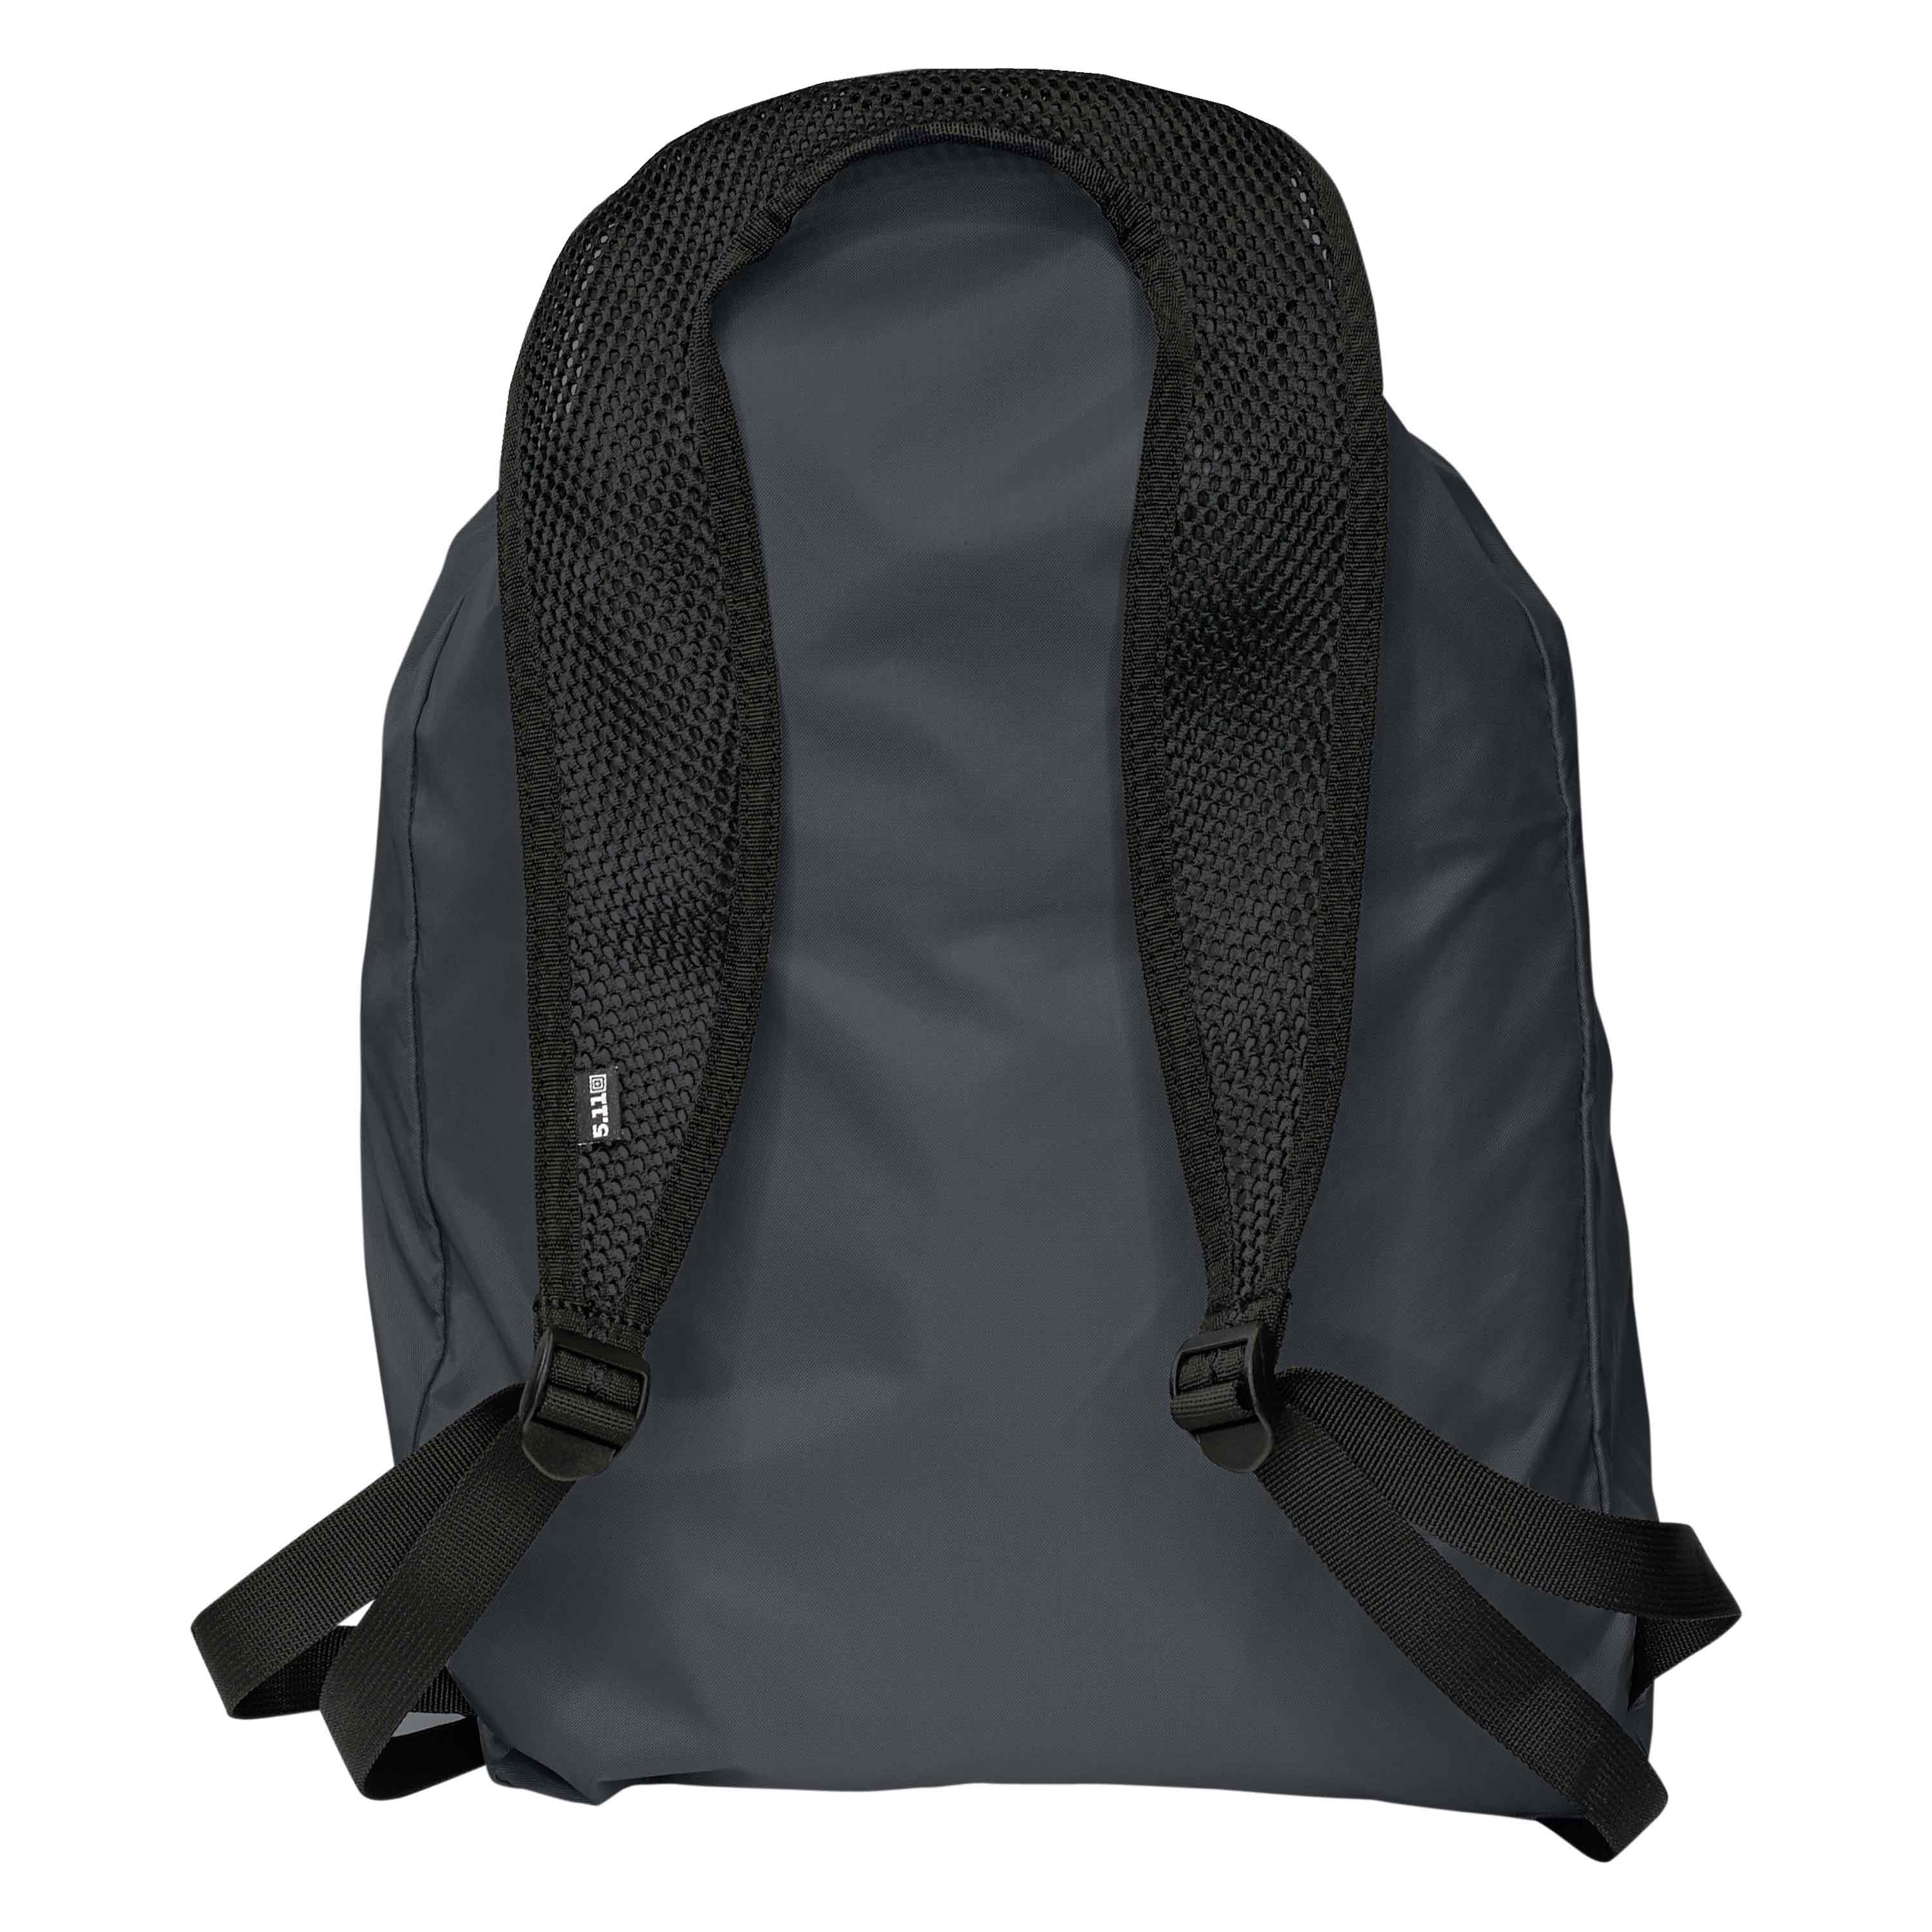 Purchase the 5.11 Backpack Rapid Expansion Pack double tap by AS